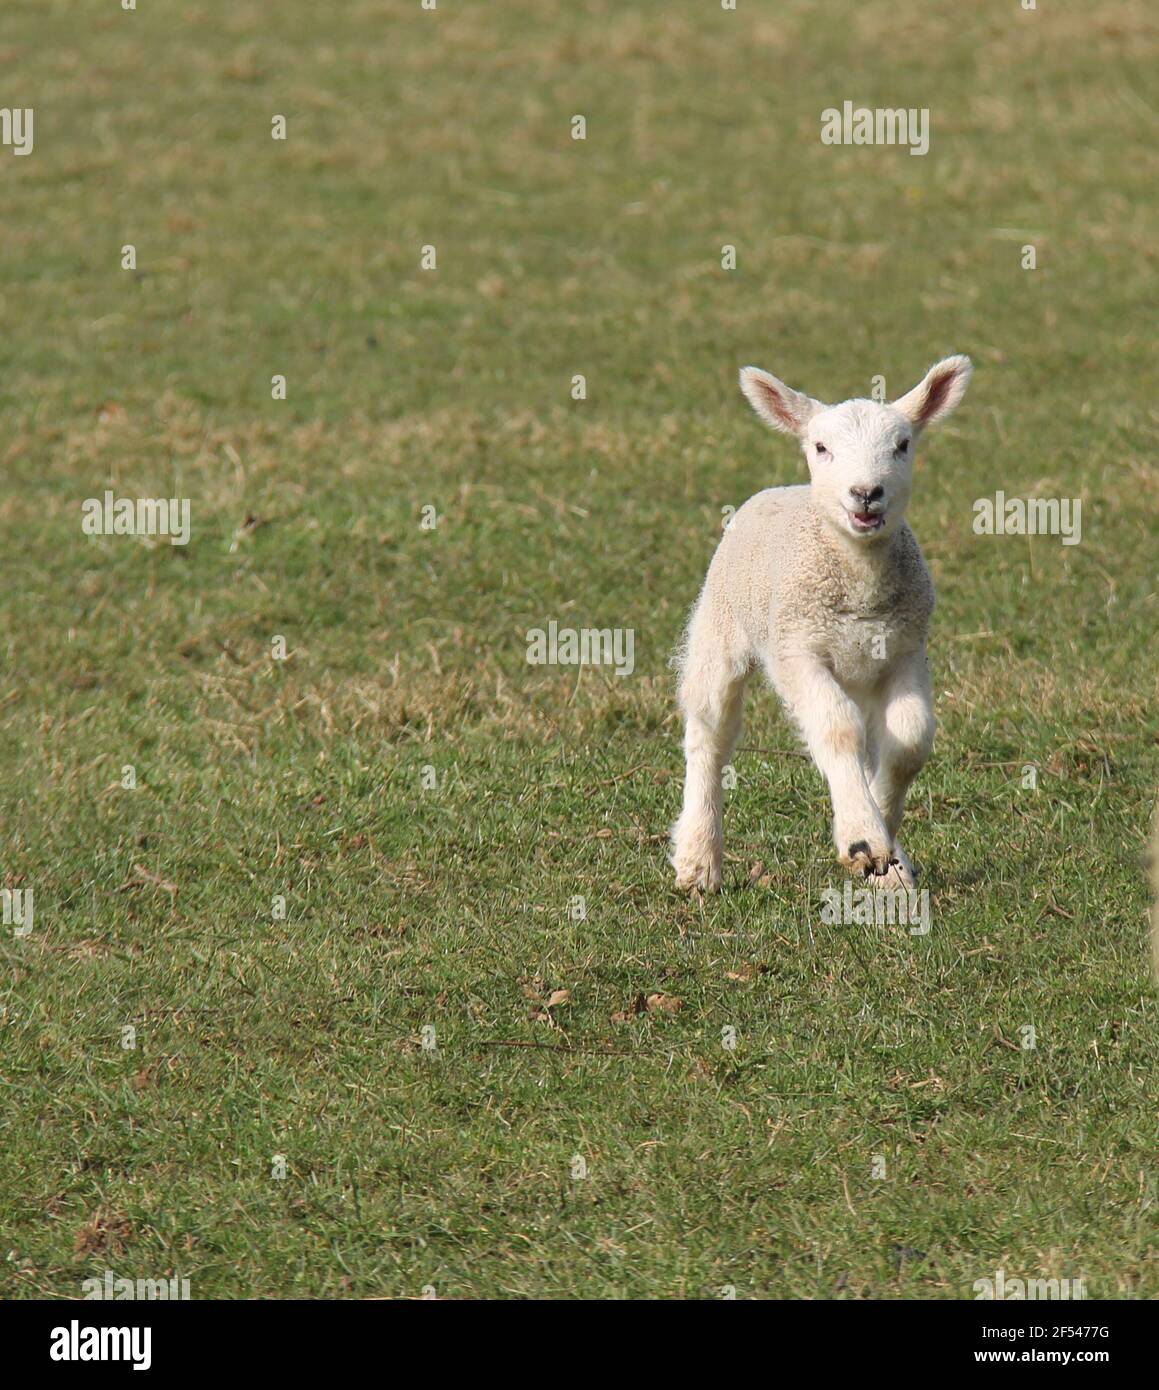 The Fresh Face of a Happy Skipping Baby Lamb. Stock Photo